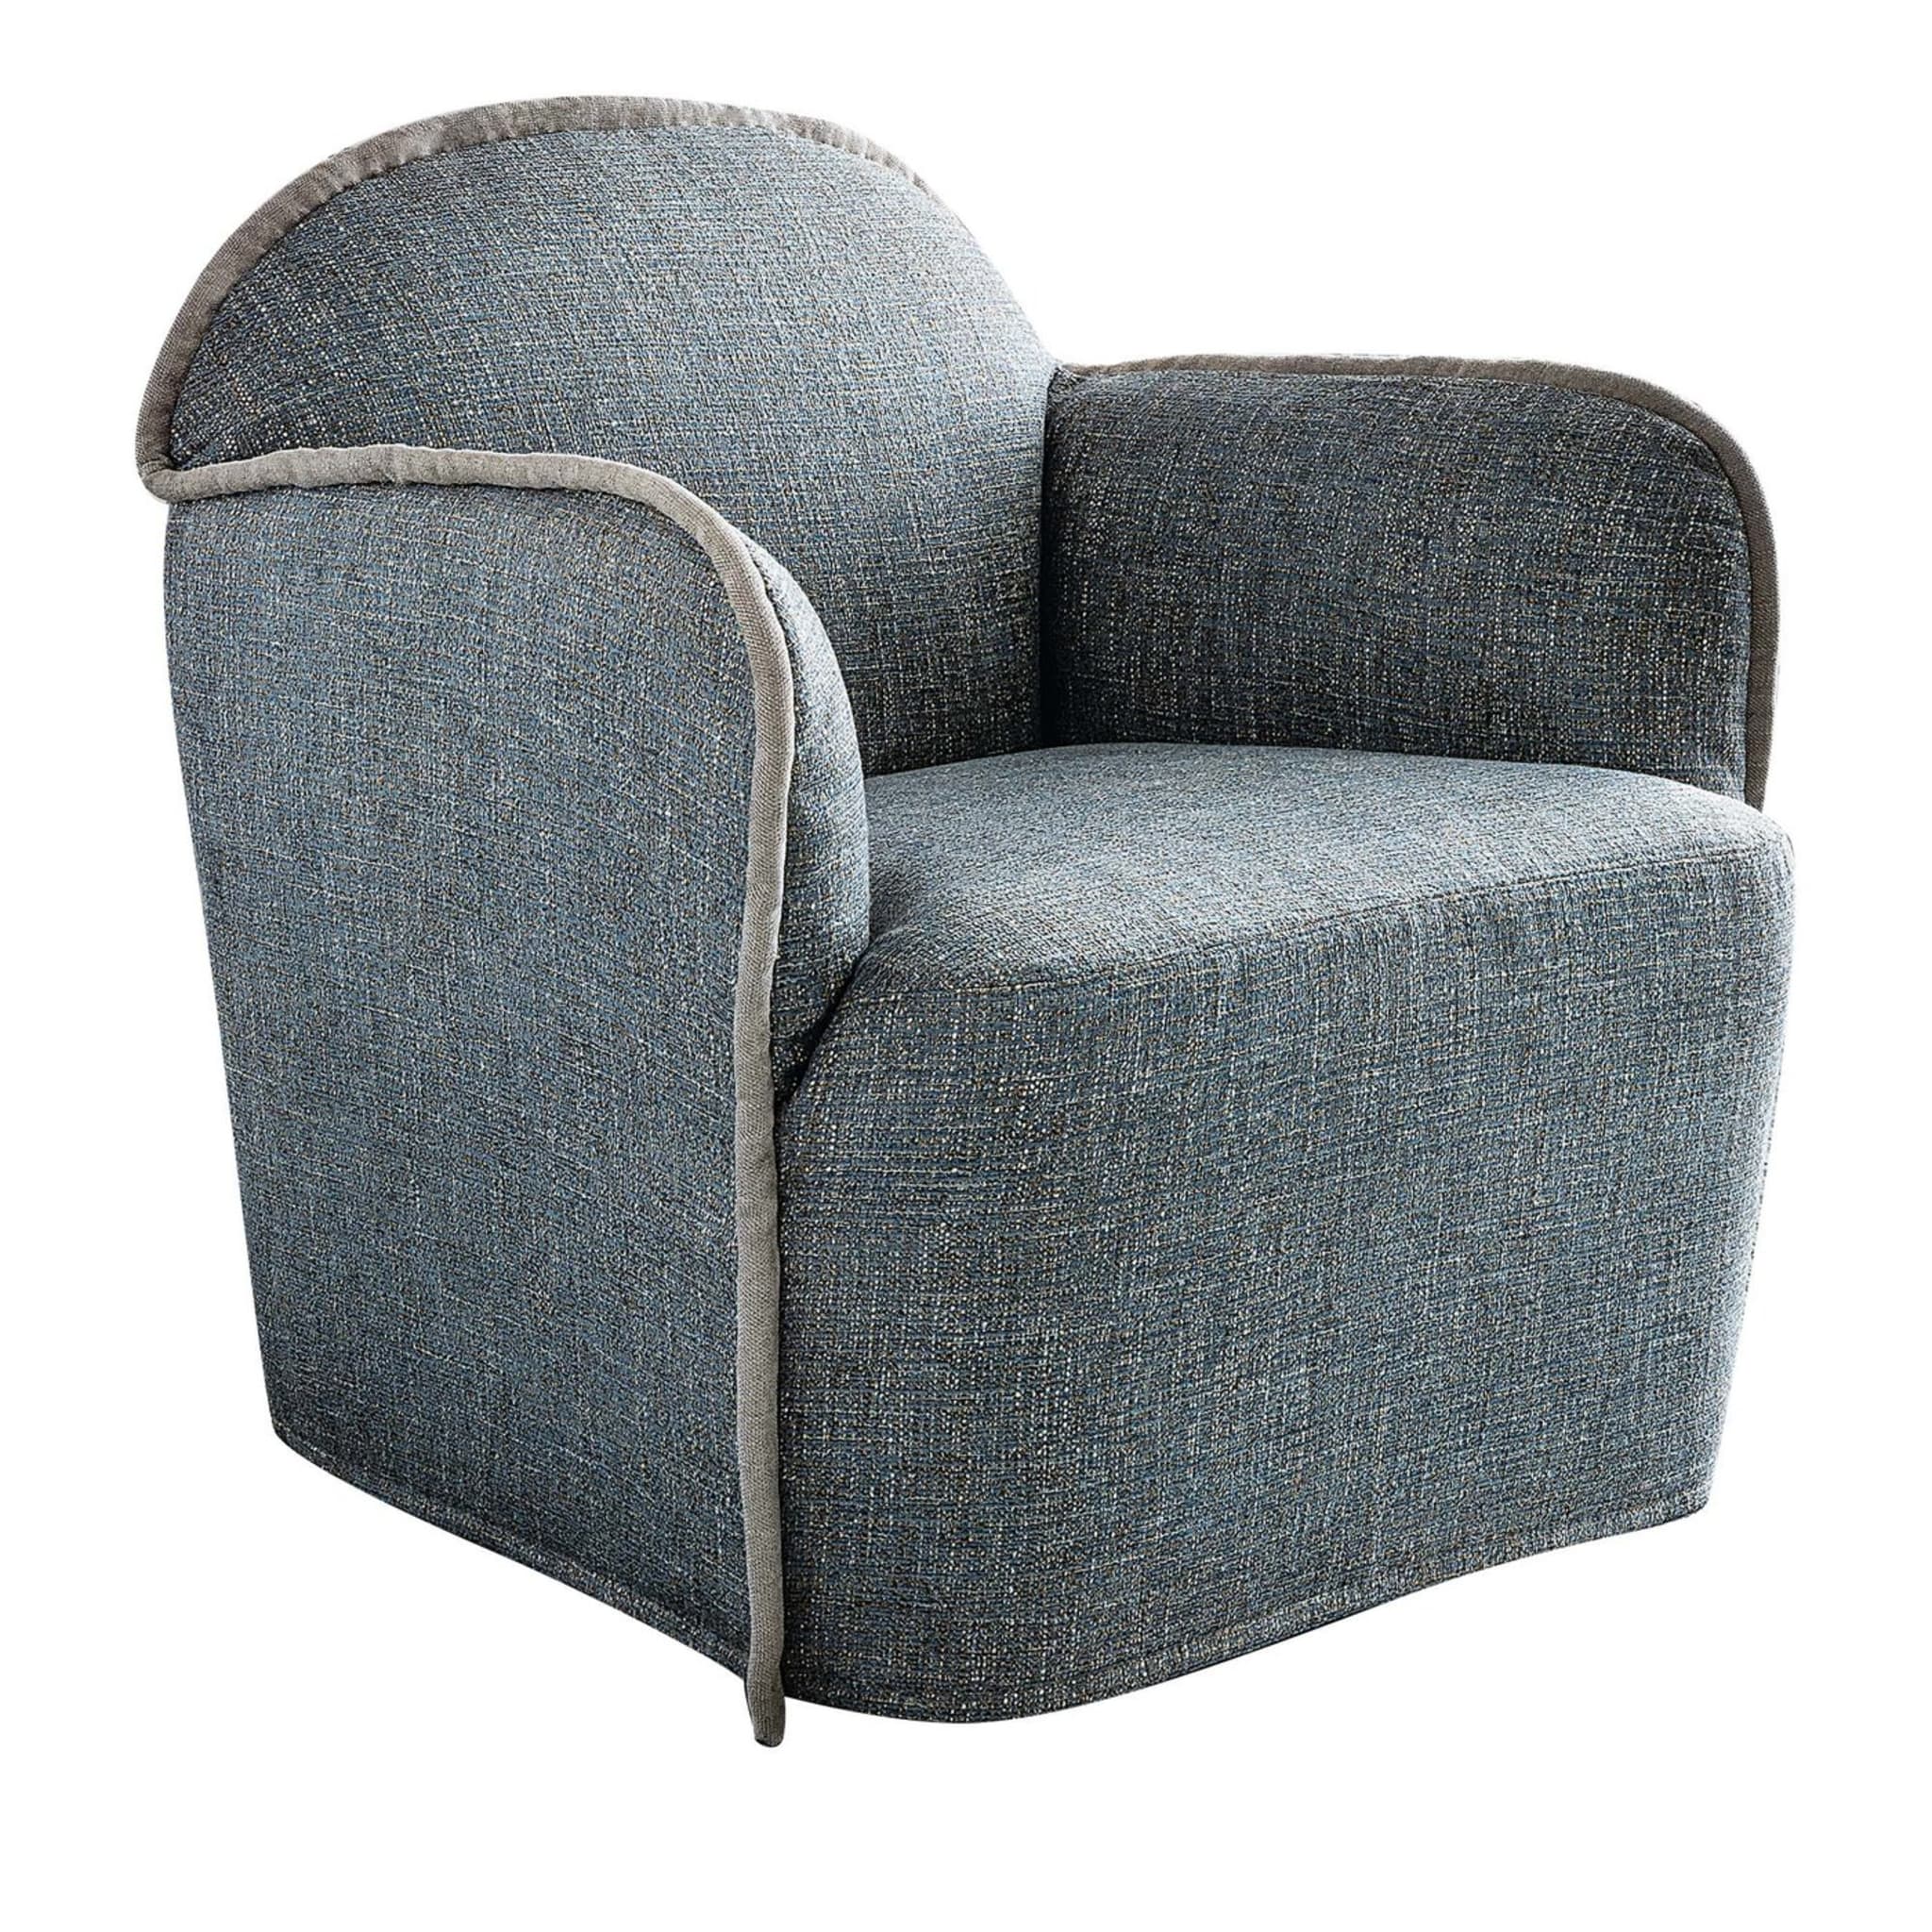 Ada Armchair by Paola Navone - Main view